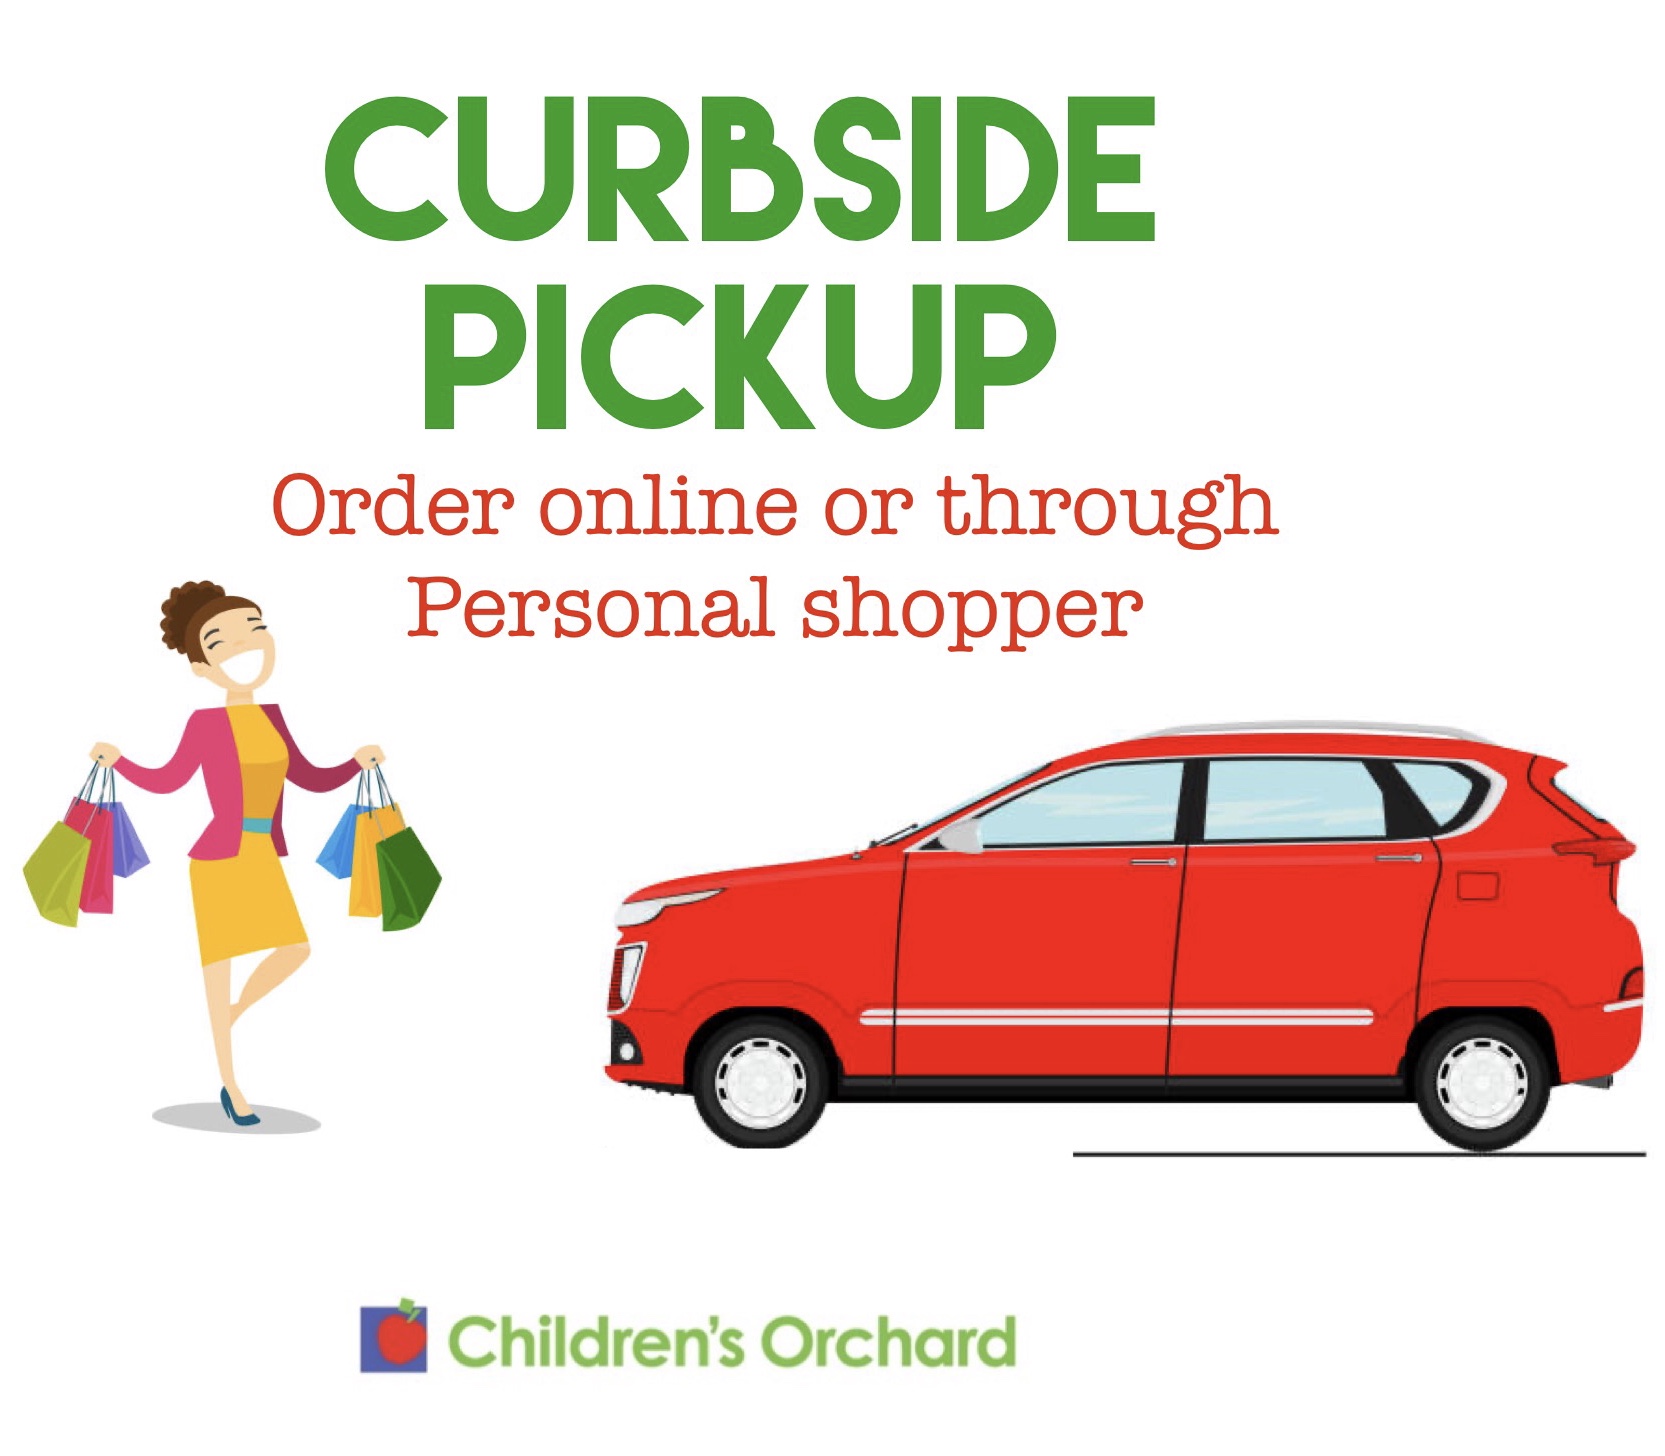 Curbside Pickup: Order online or through personal shopper.